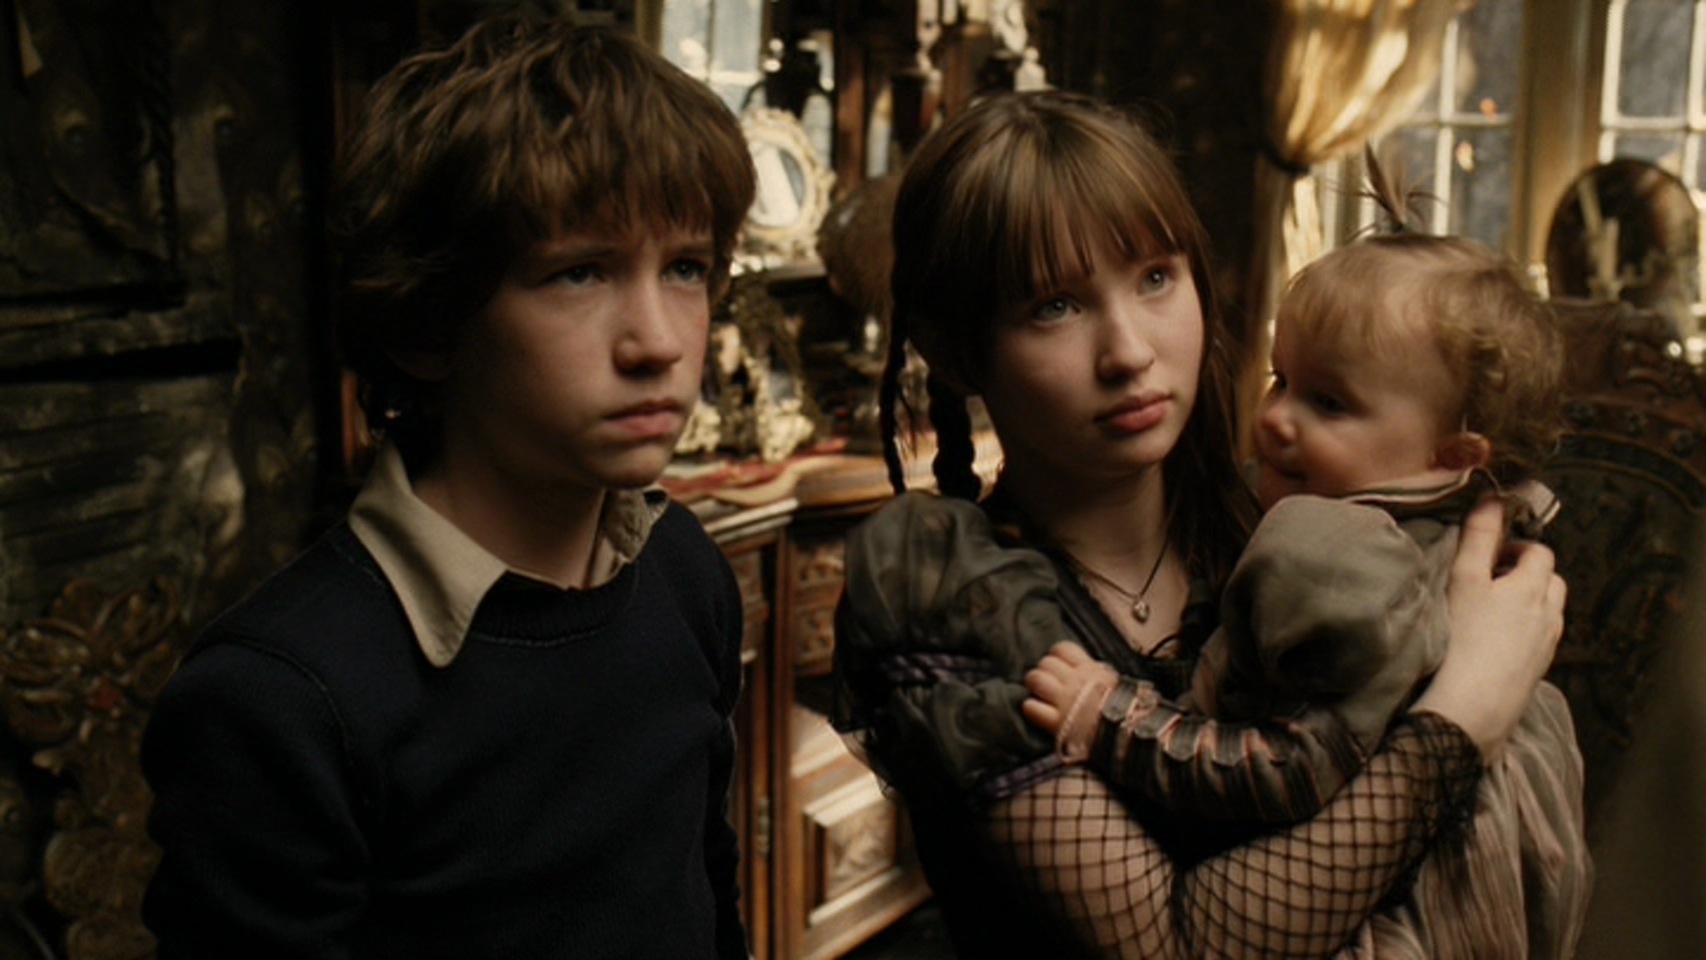 Free Direct Download Movie Series Of Unfortunate Events Full